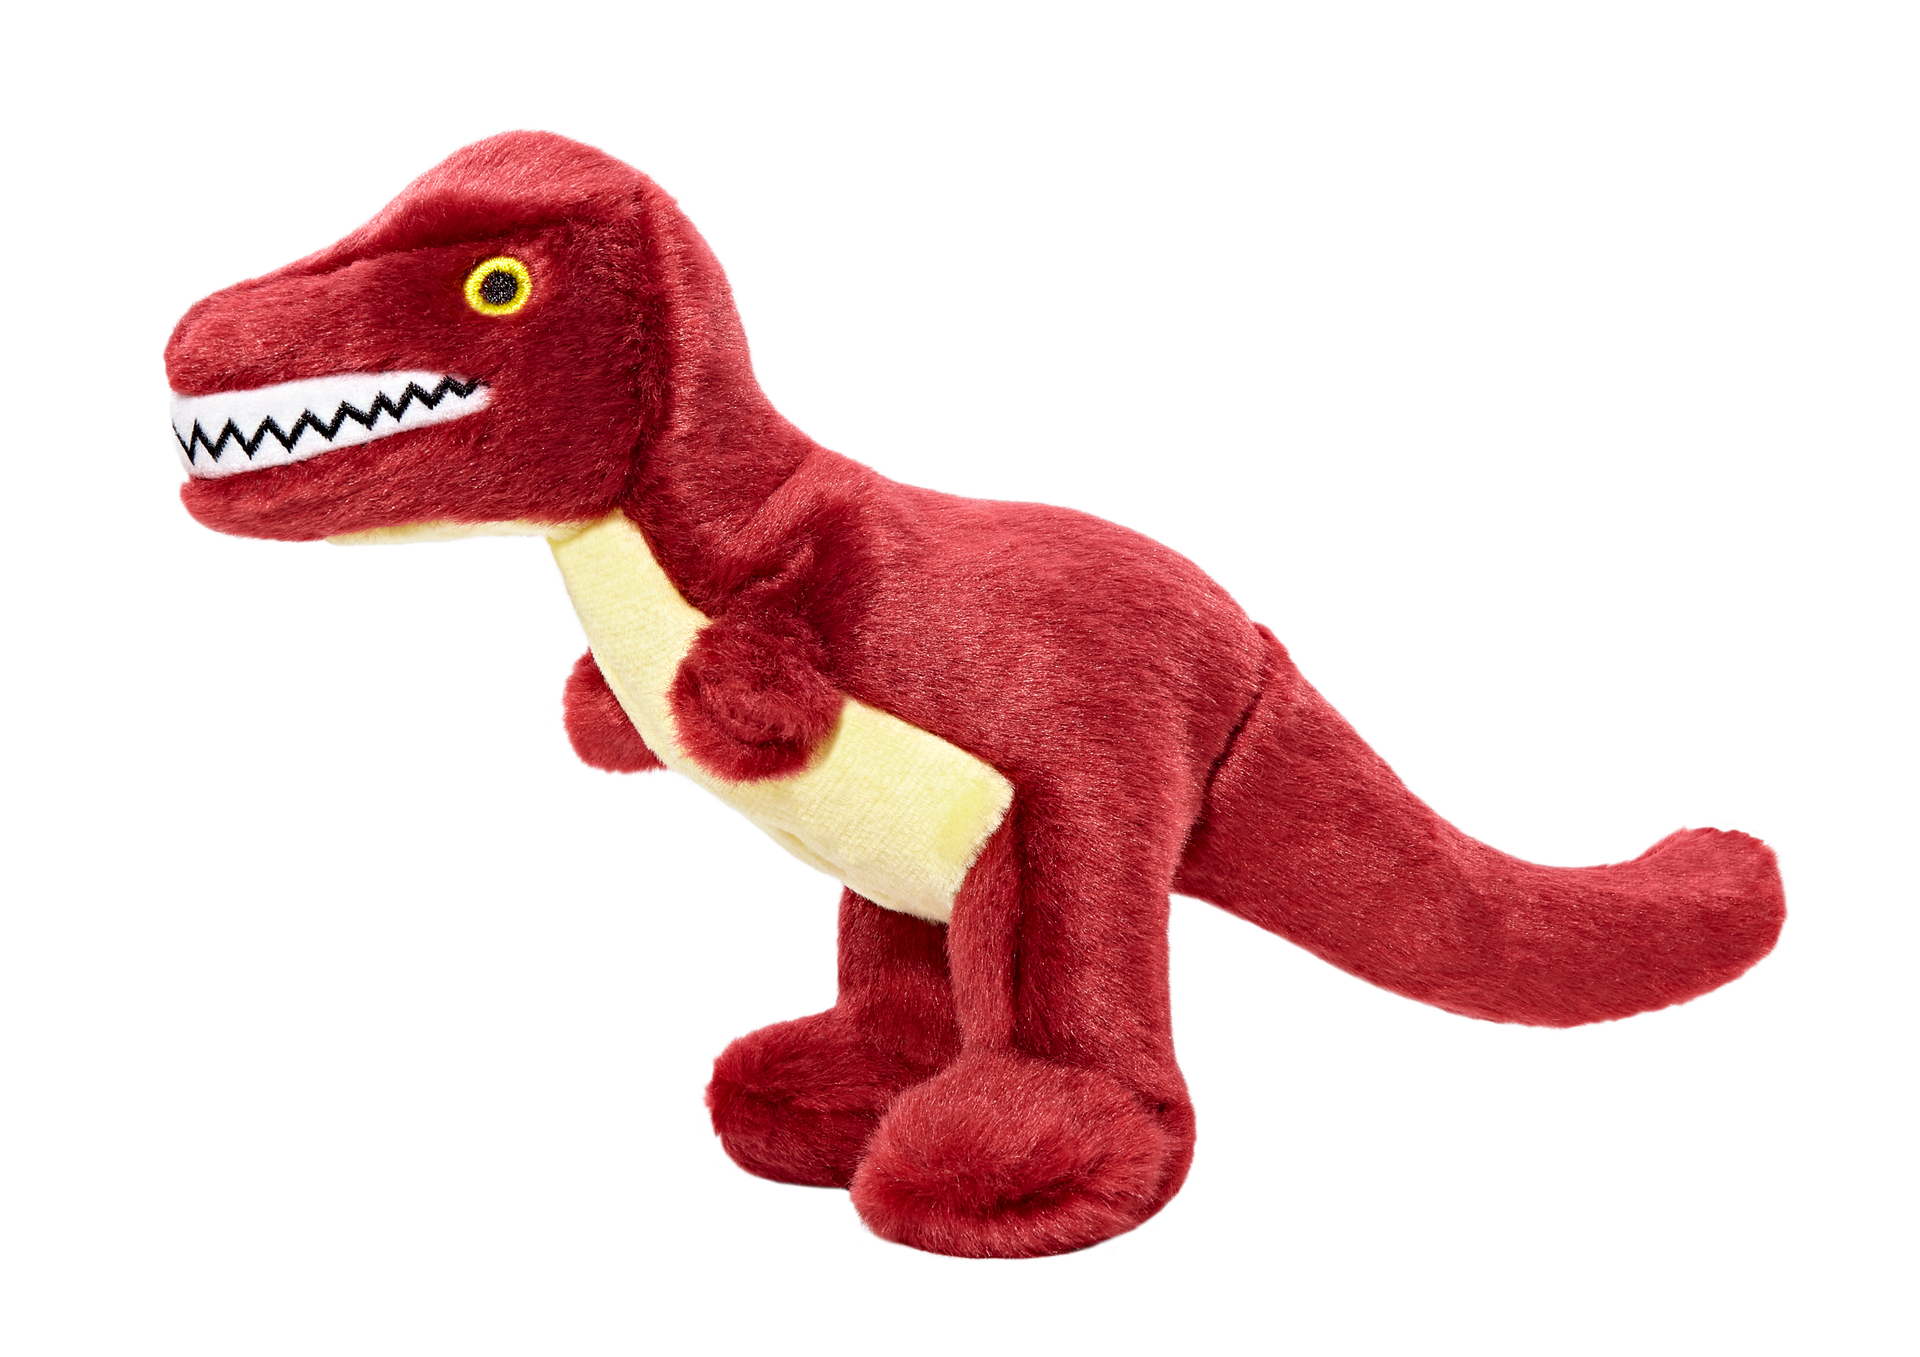 Tiny T-Rex Plush Toy for Dogs